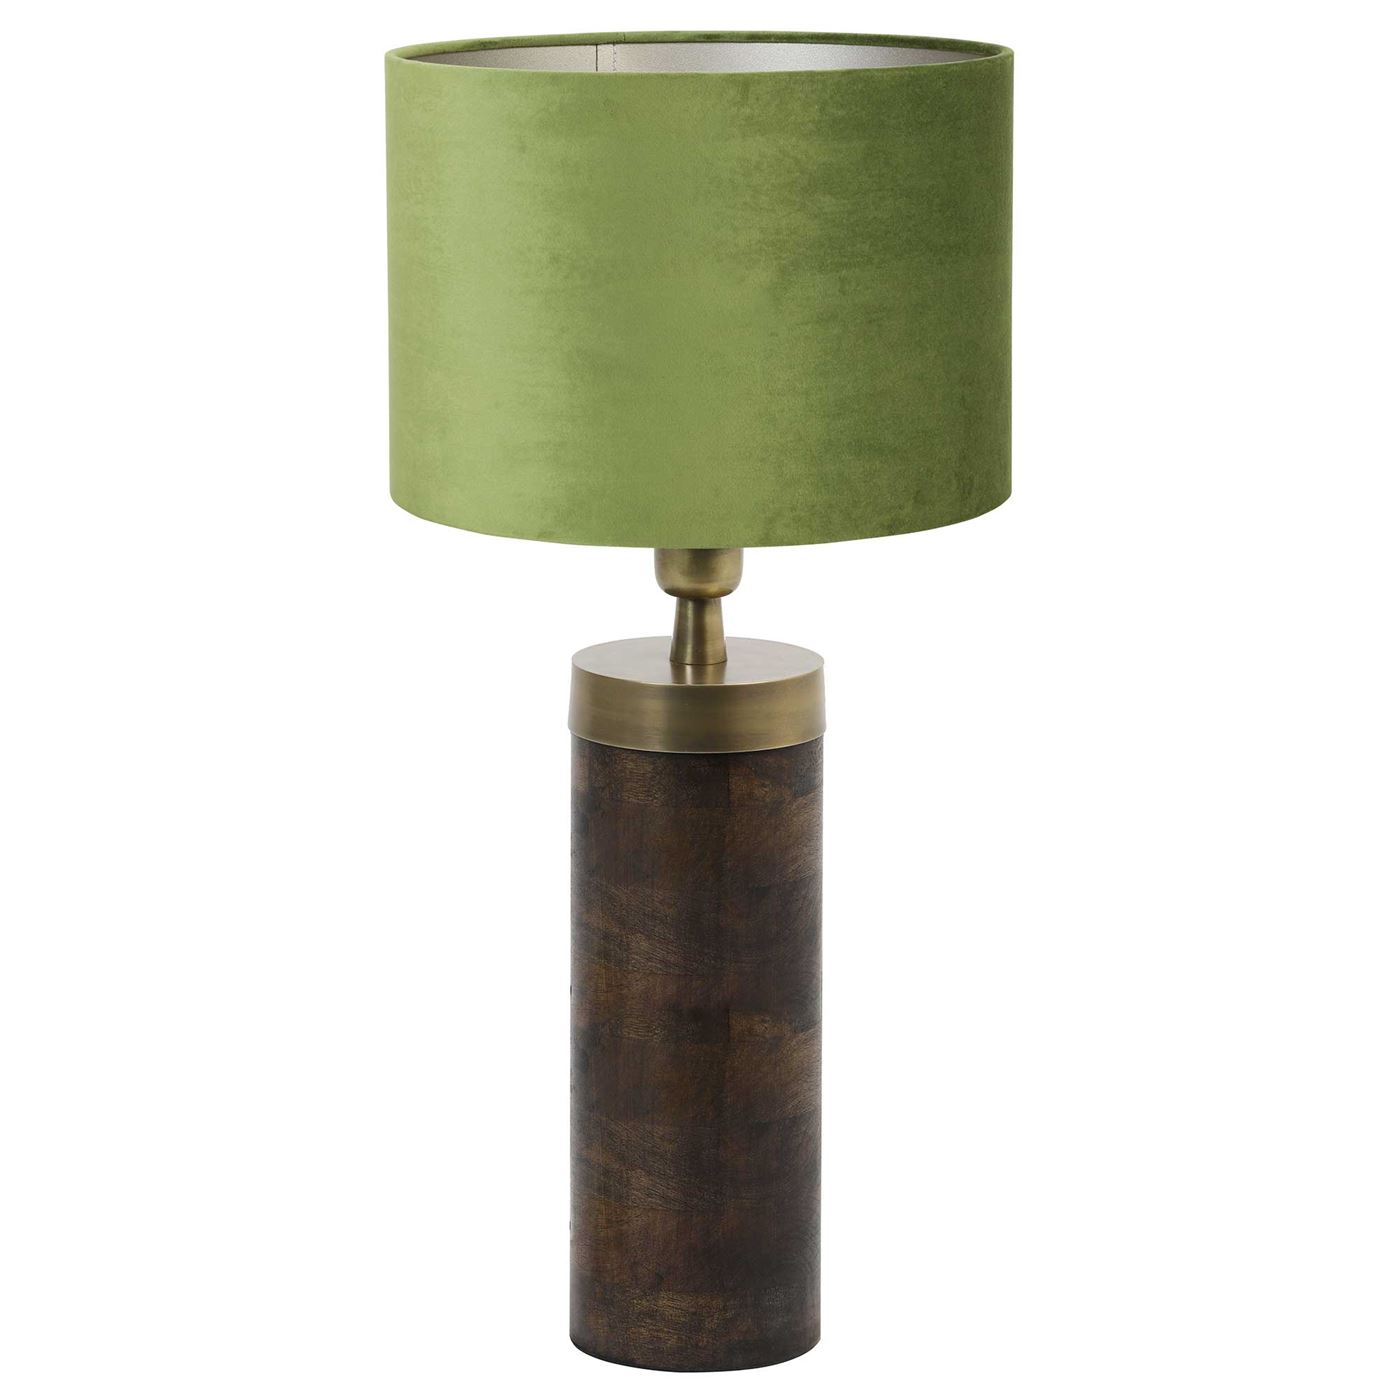 Photo of Olive & dark wood table lamp in green